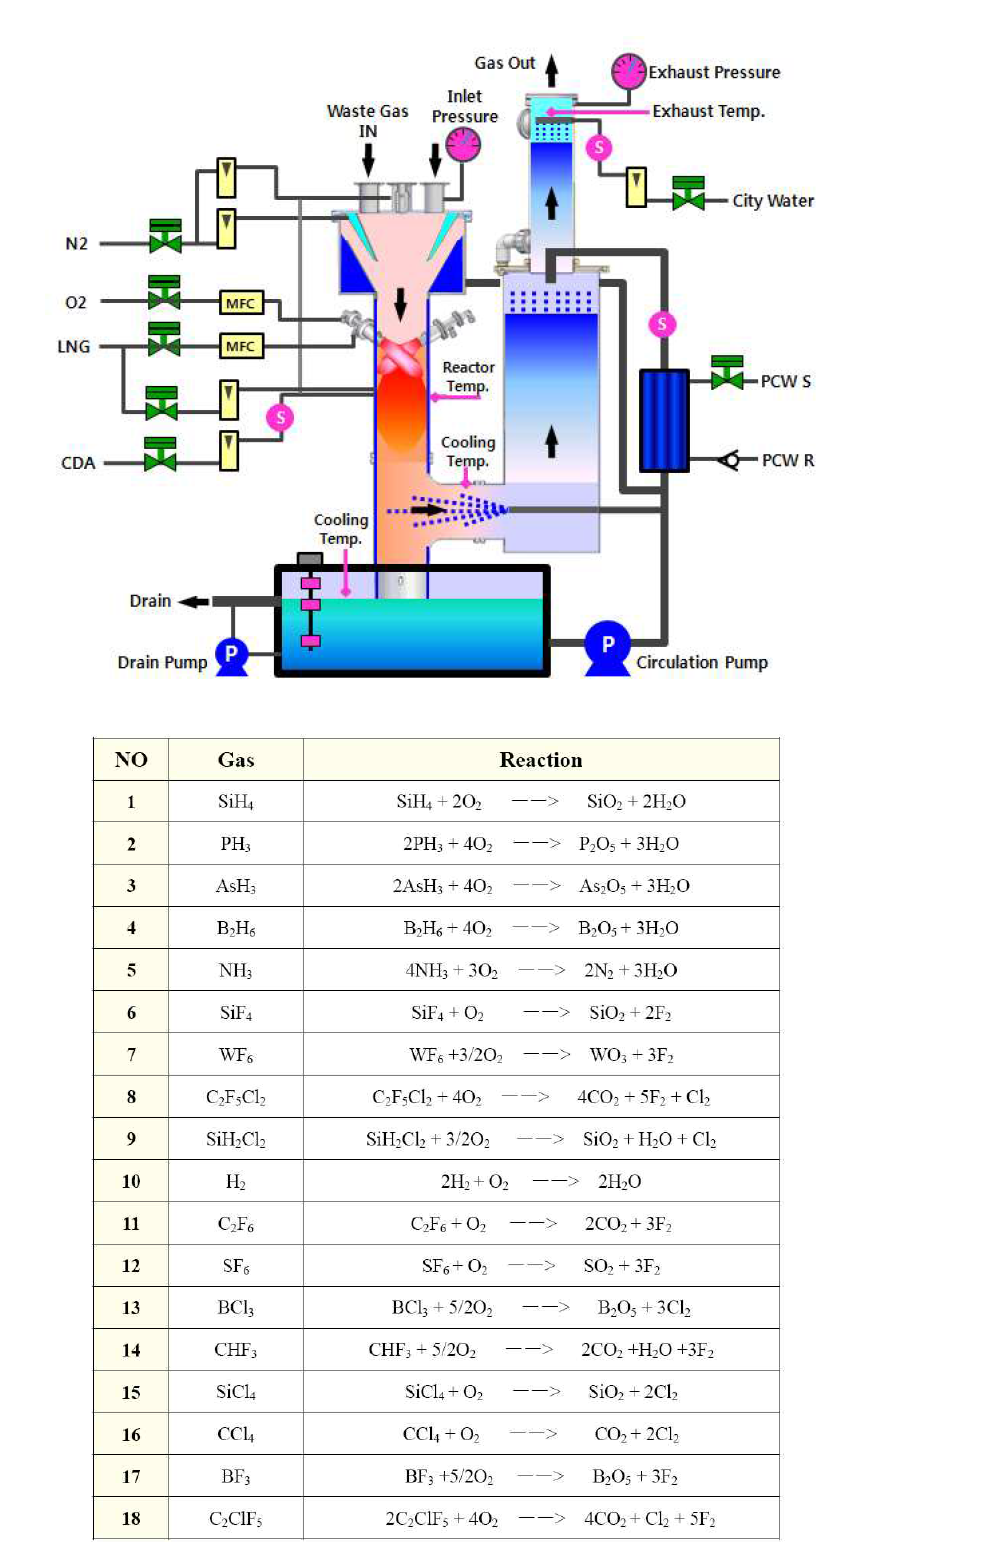 System Flow diagram and GAS Reation